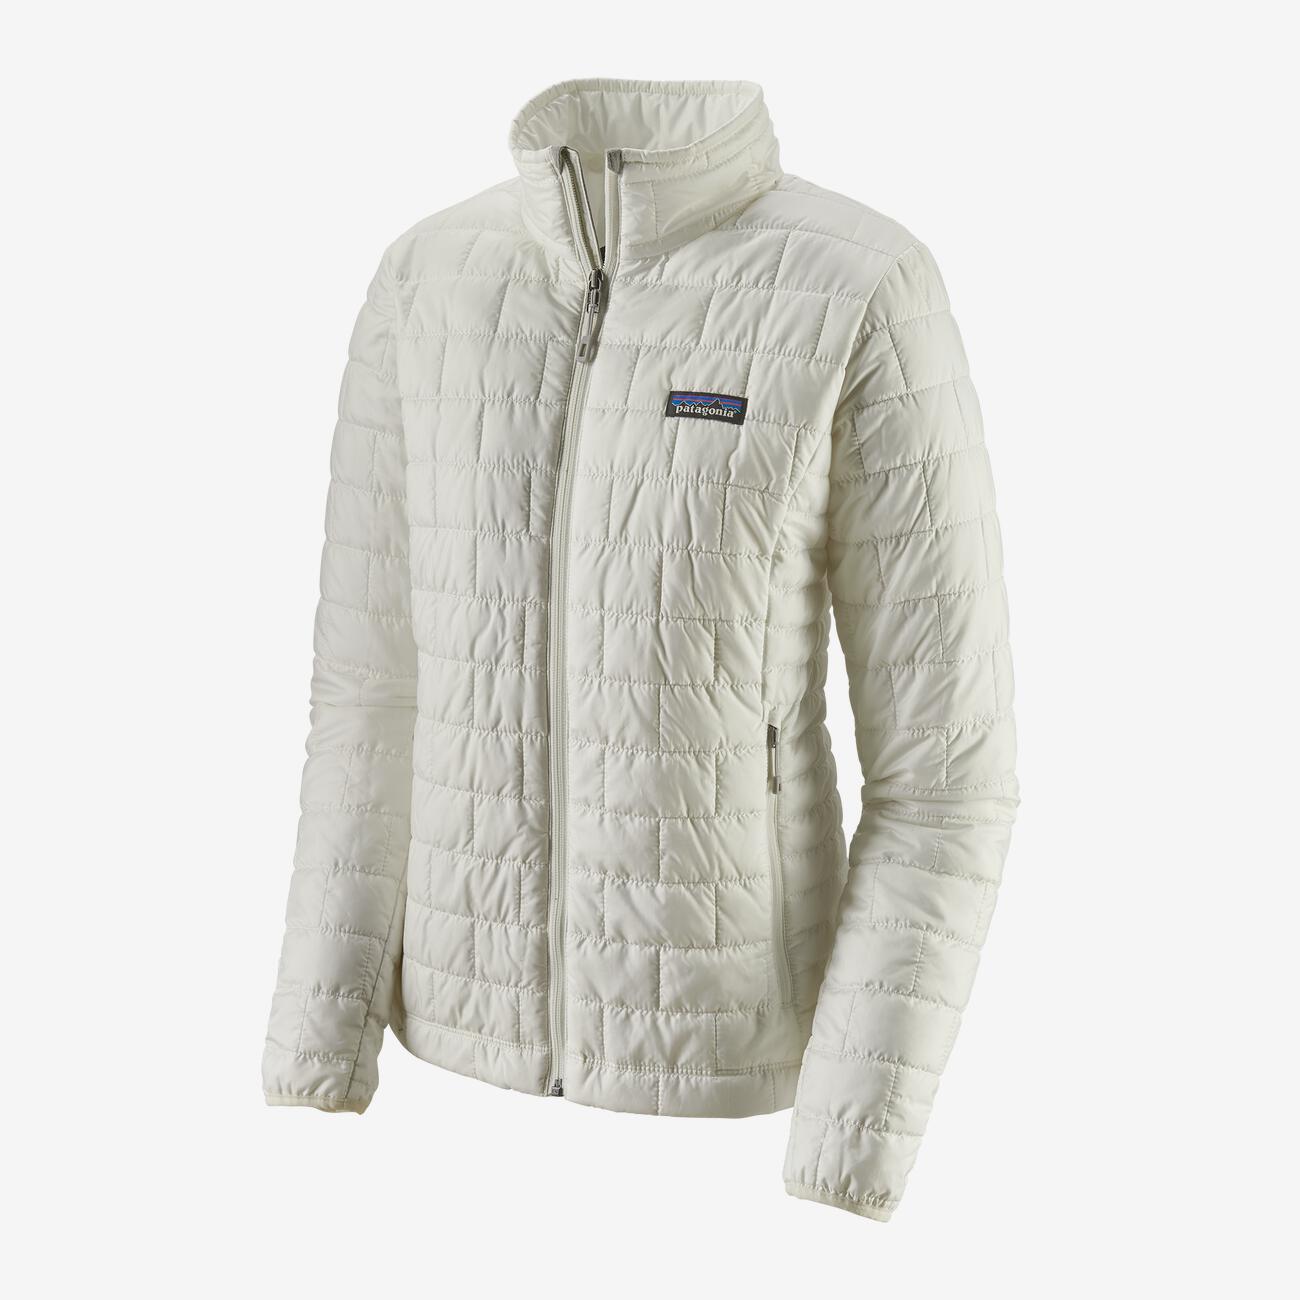 Patagonia Women's Nano Puff Jacket-WOMENS CLOTHING-Birch White-L-Kevin's Fine Outdoor Gear & Apparel